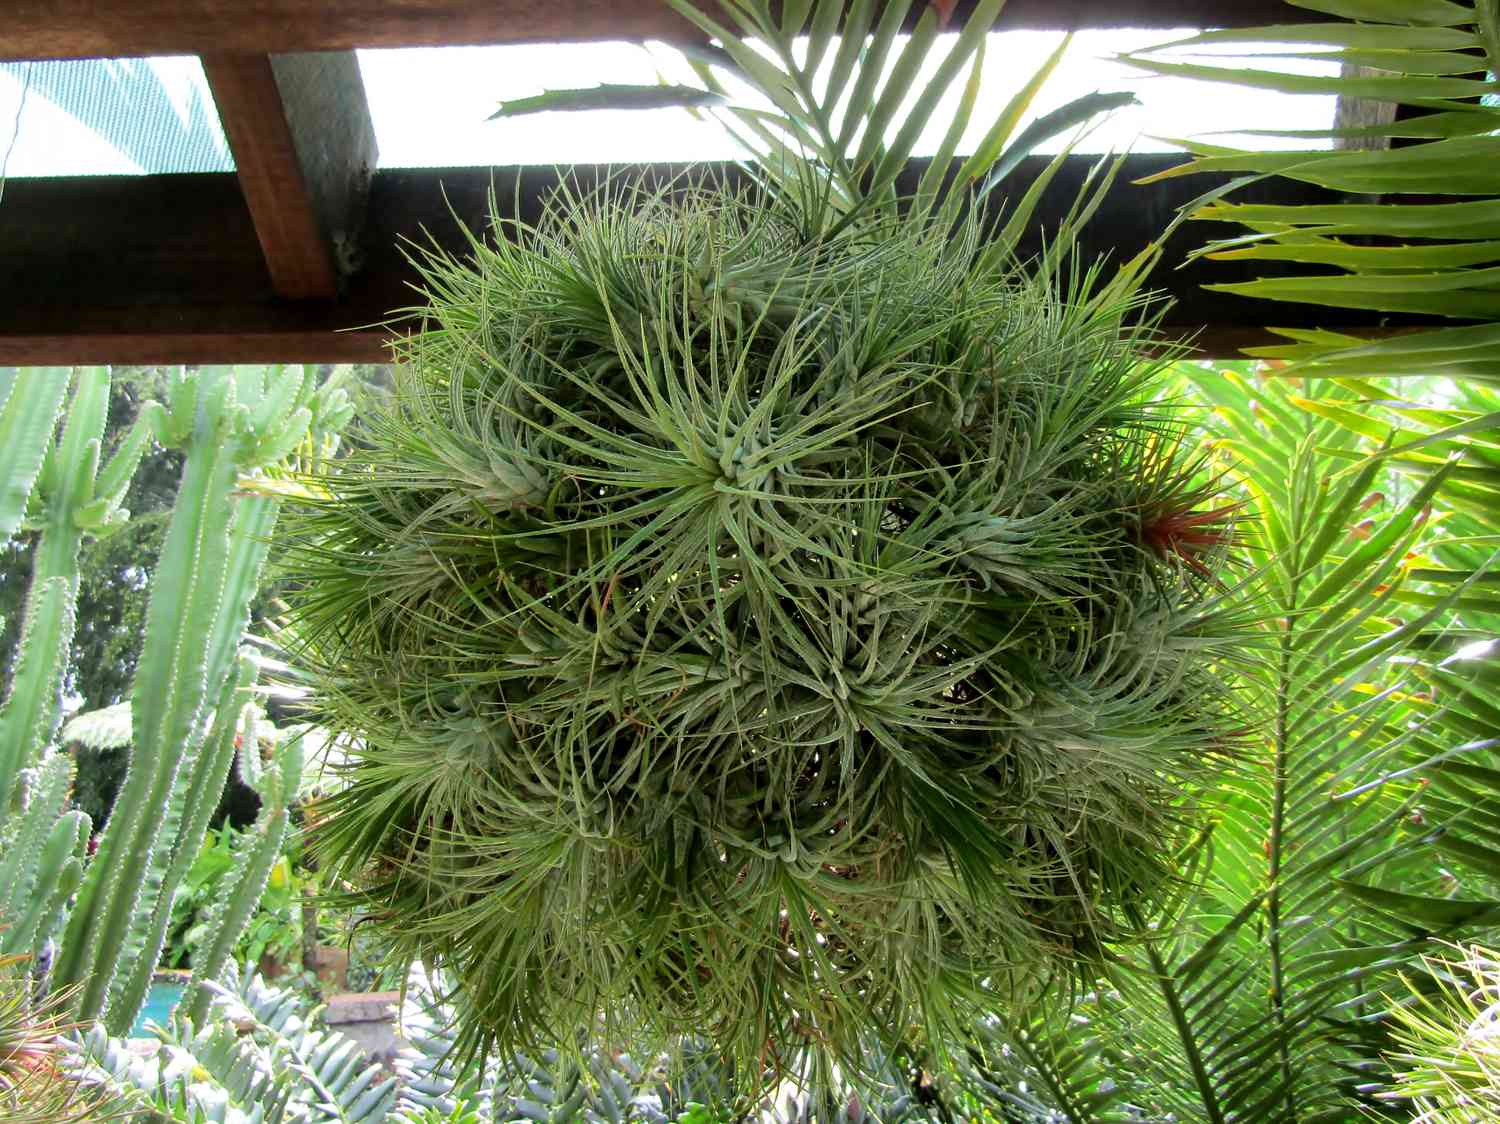 Mad Pupper air plant shaped as a hanging ball of green leaves